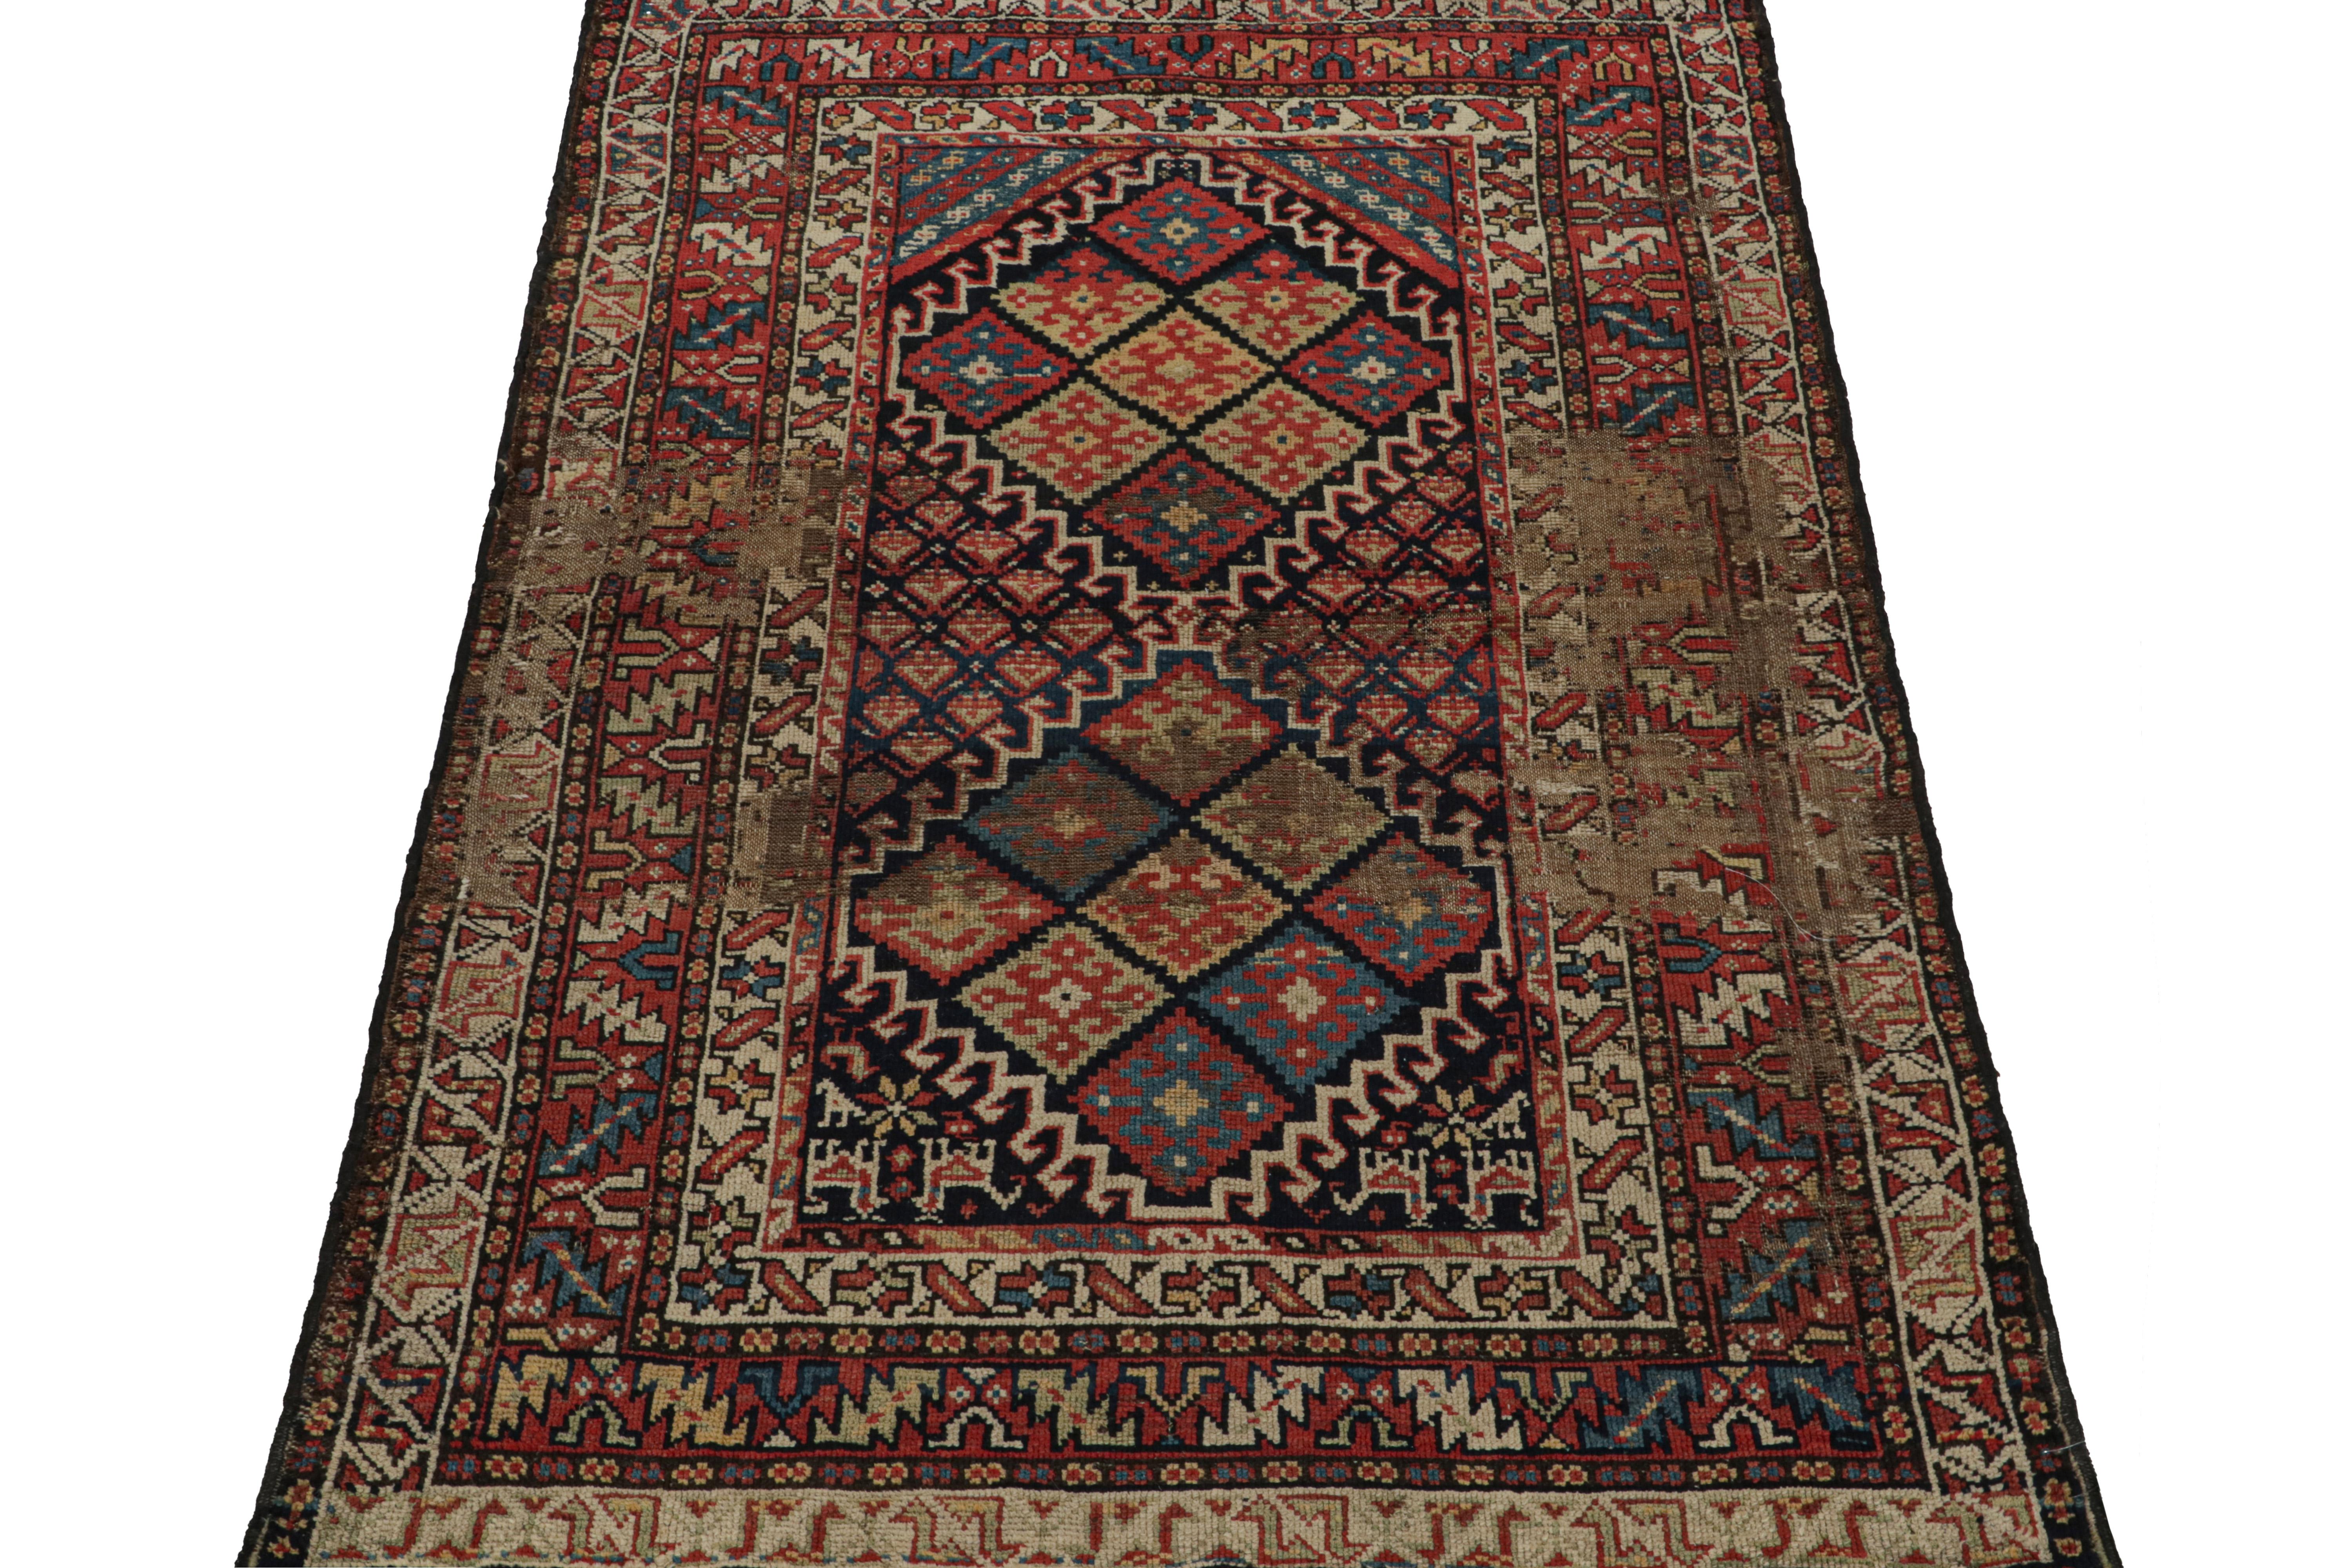 Tribal Antique Caucasian Rug in Beige, Blue & Red Geometric Patterns, from Rug & Kilim